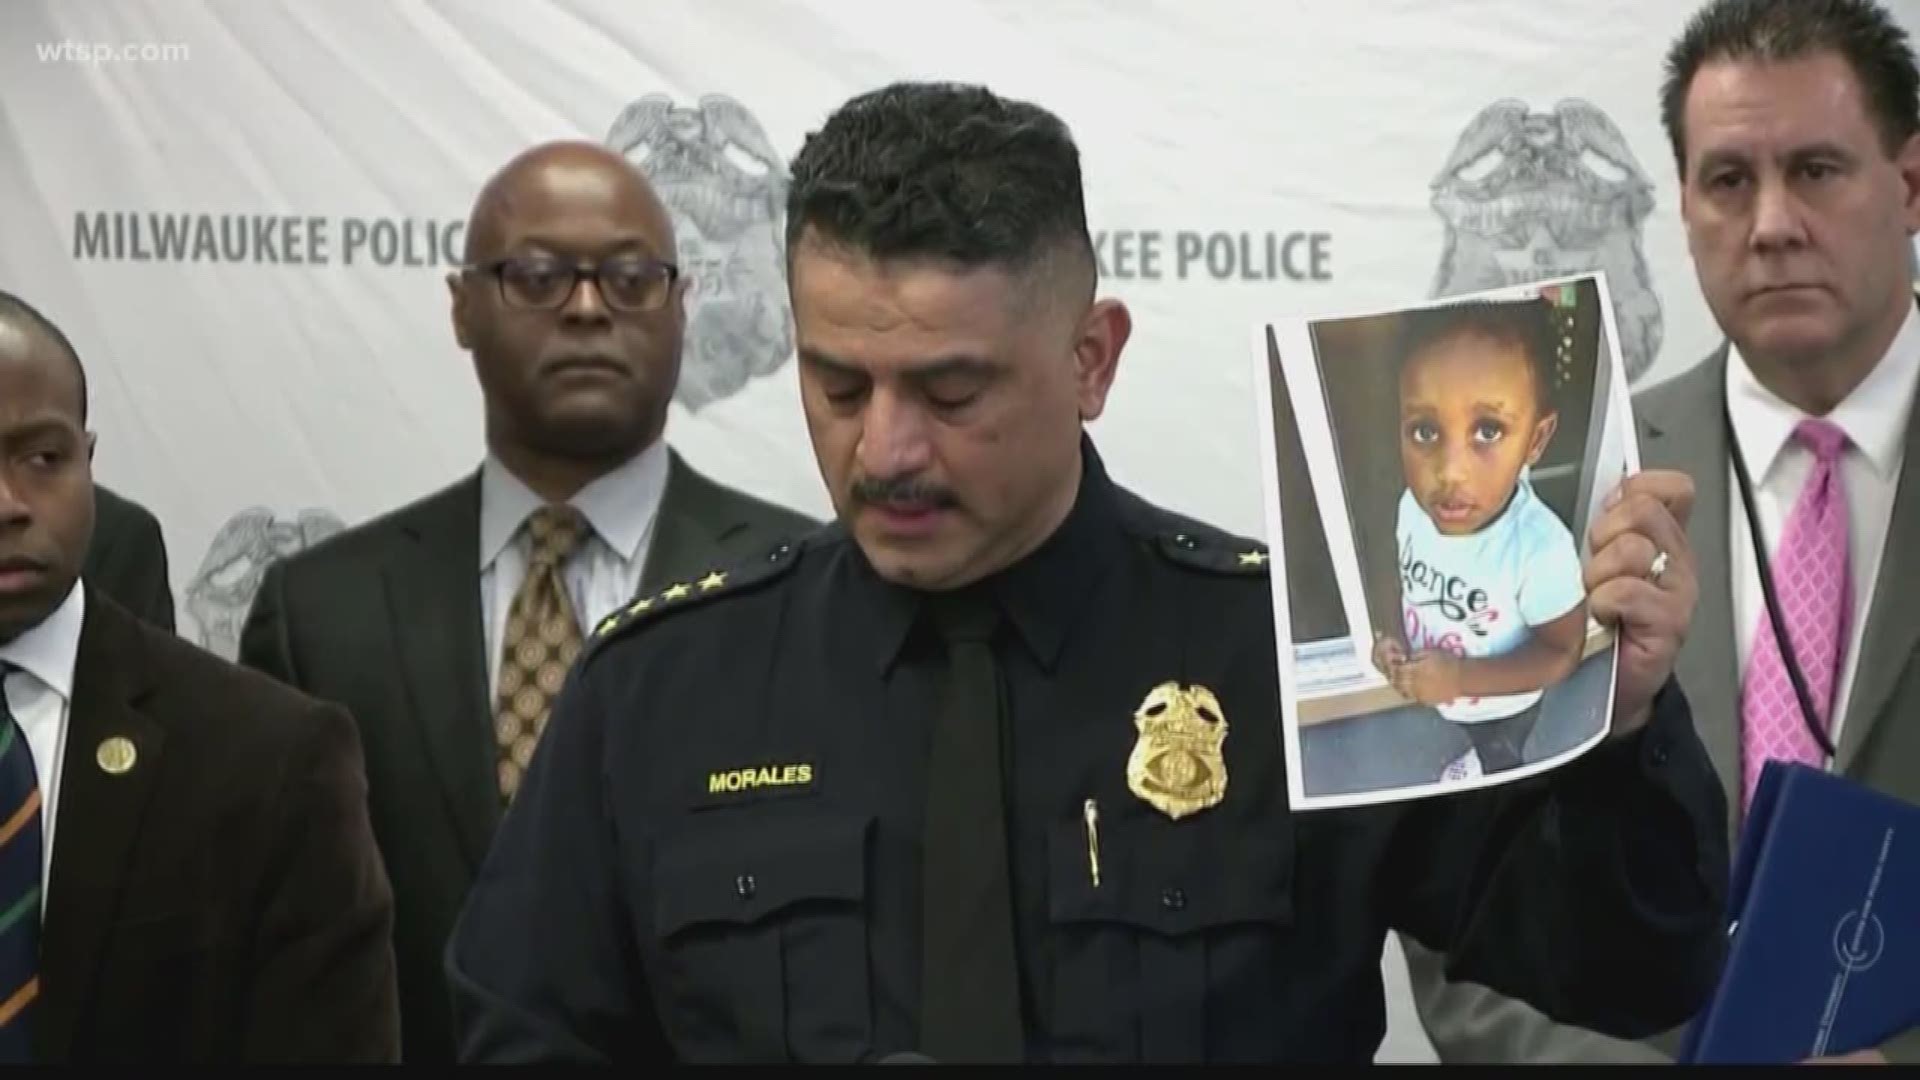 Her dad is accused of killing her mom and deputies have been unable to find the 2-year-old daughter.